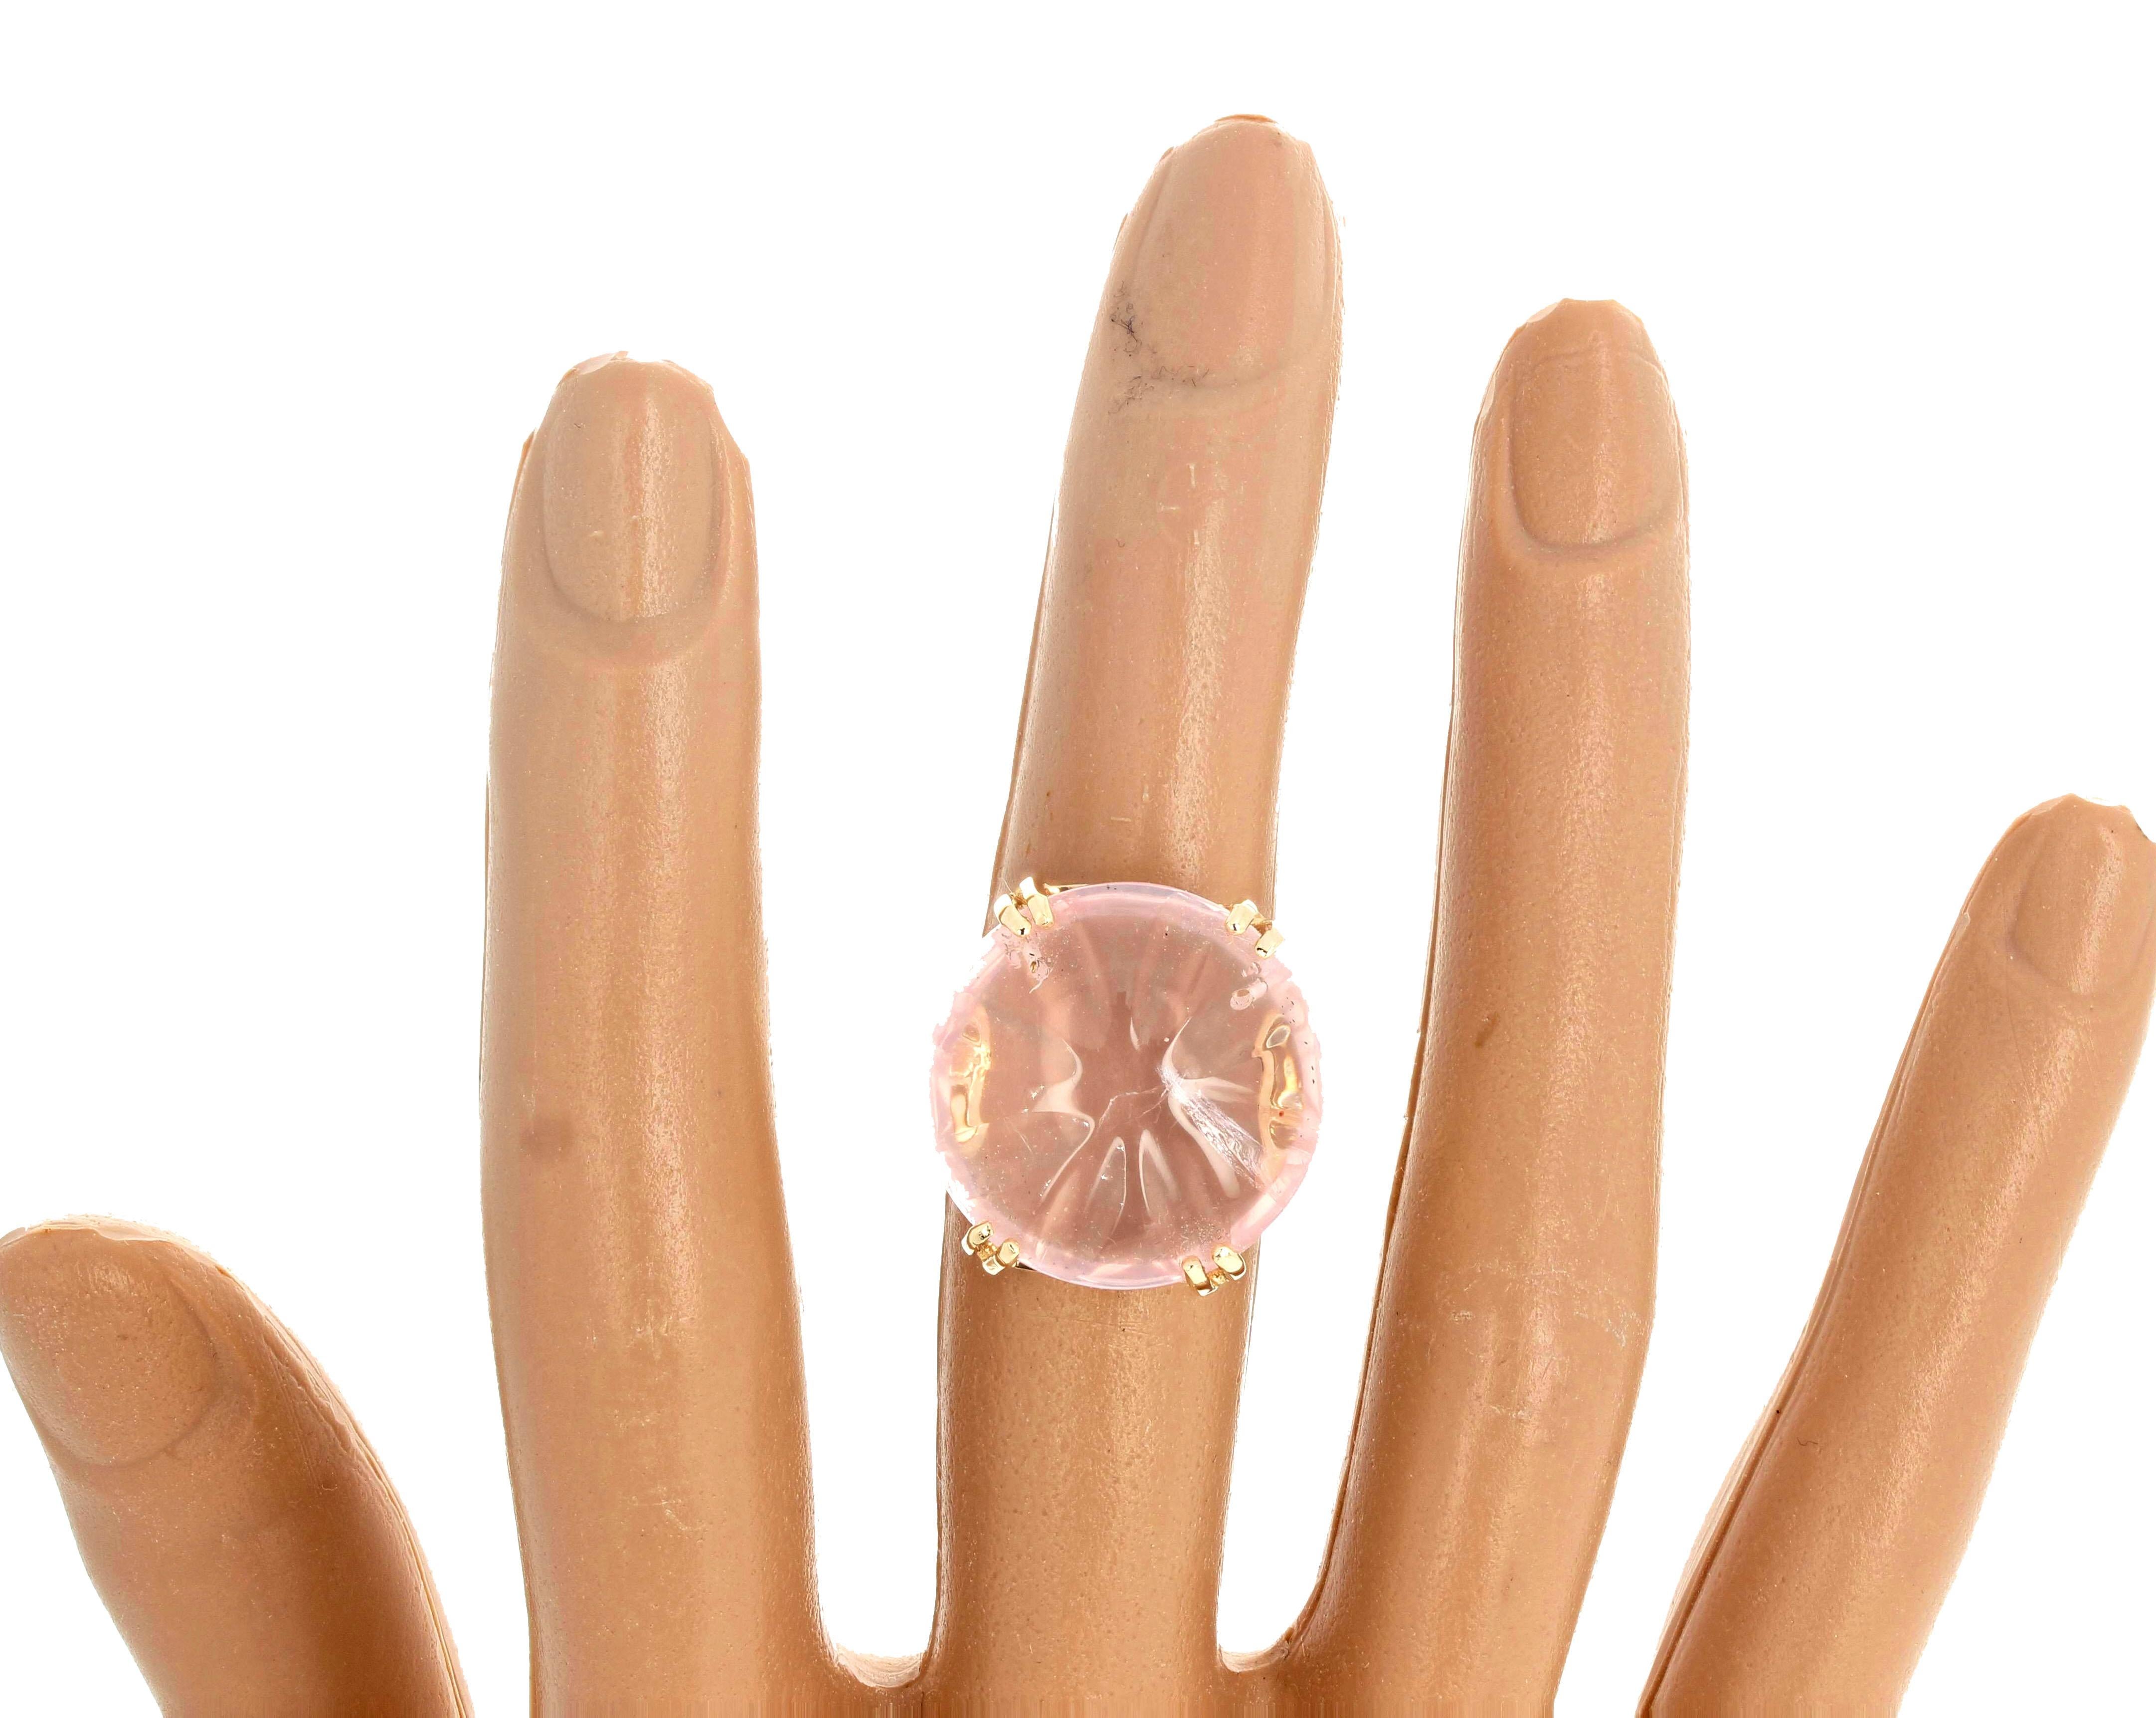 Gorgeous highly polished smoothly carved Rose Quartz - approximatley 14 carats - 20 mm wide - set in this beautiful 10Kt yellow gold ring size 7 (sizable).  This is fascinating to look at because of the rare unusual carved polished surface.  